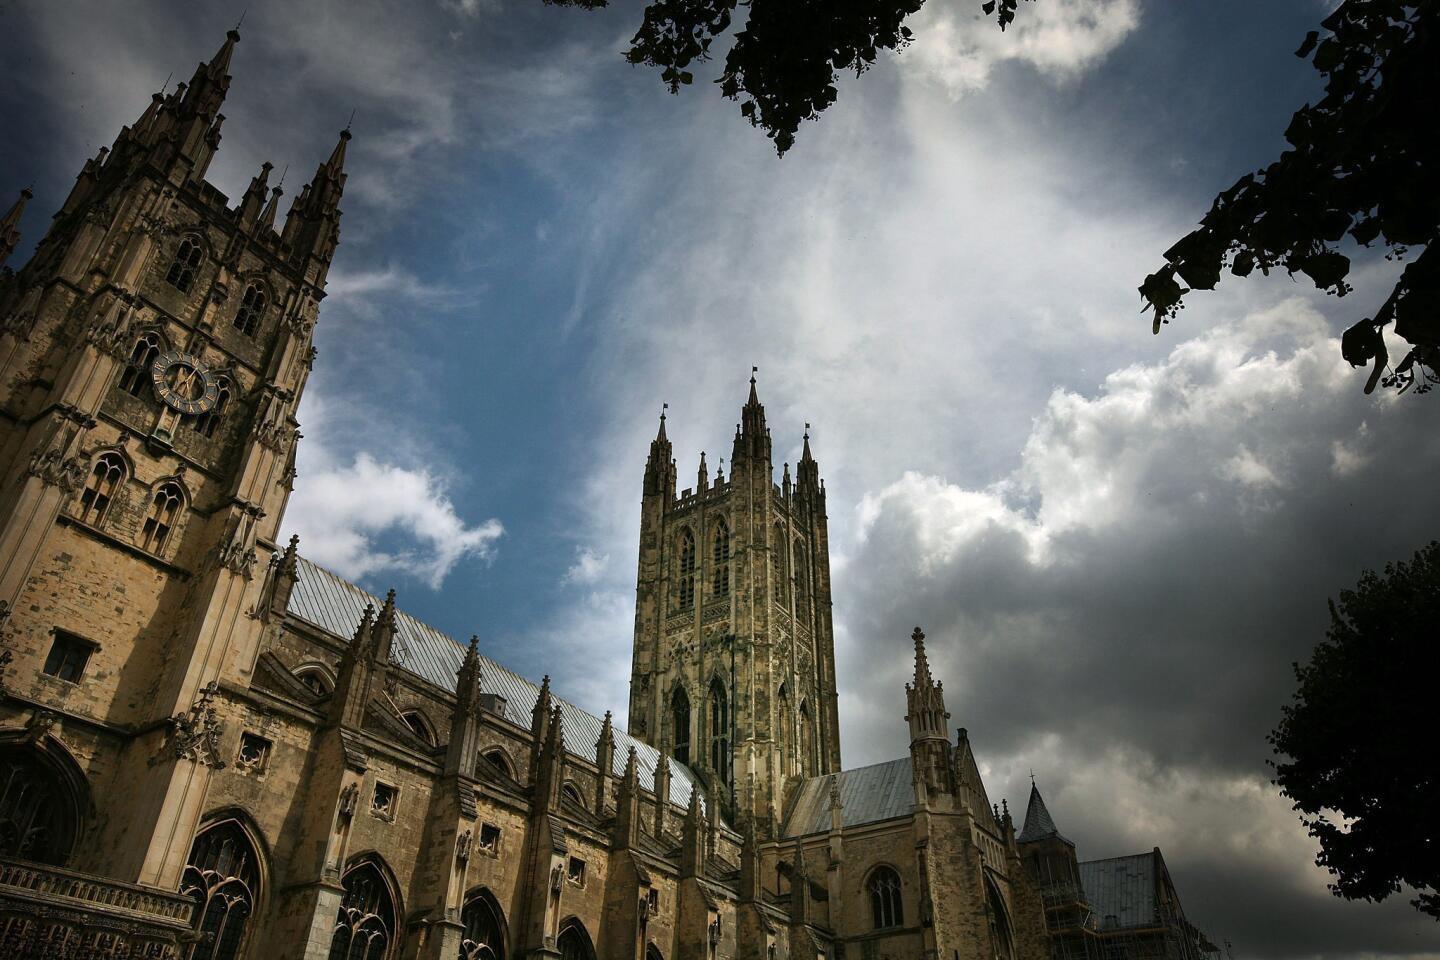 This soaring Gothic confection in Kent -- a UNESCO World Heritage Site -- is the Mother Church of the Anglican faith. Check out where Thomas Becket was martyred, duck underground to the multicolumned crypt and marvel at the breathtaking stained-glass windows, including one from 1176. Before jumping back on the London-bound train, explore the town's picture-perfect medieval center, stopping at the Roman Museum and Canterbury Heritage Museum. Great old pubs abound, including the wood-beamed Parrot where Bishops Finger ale is recommended. Info here.